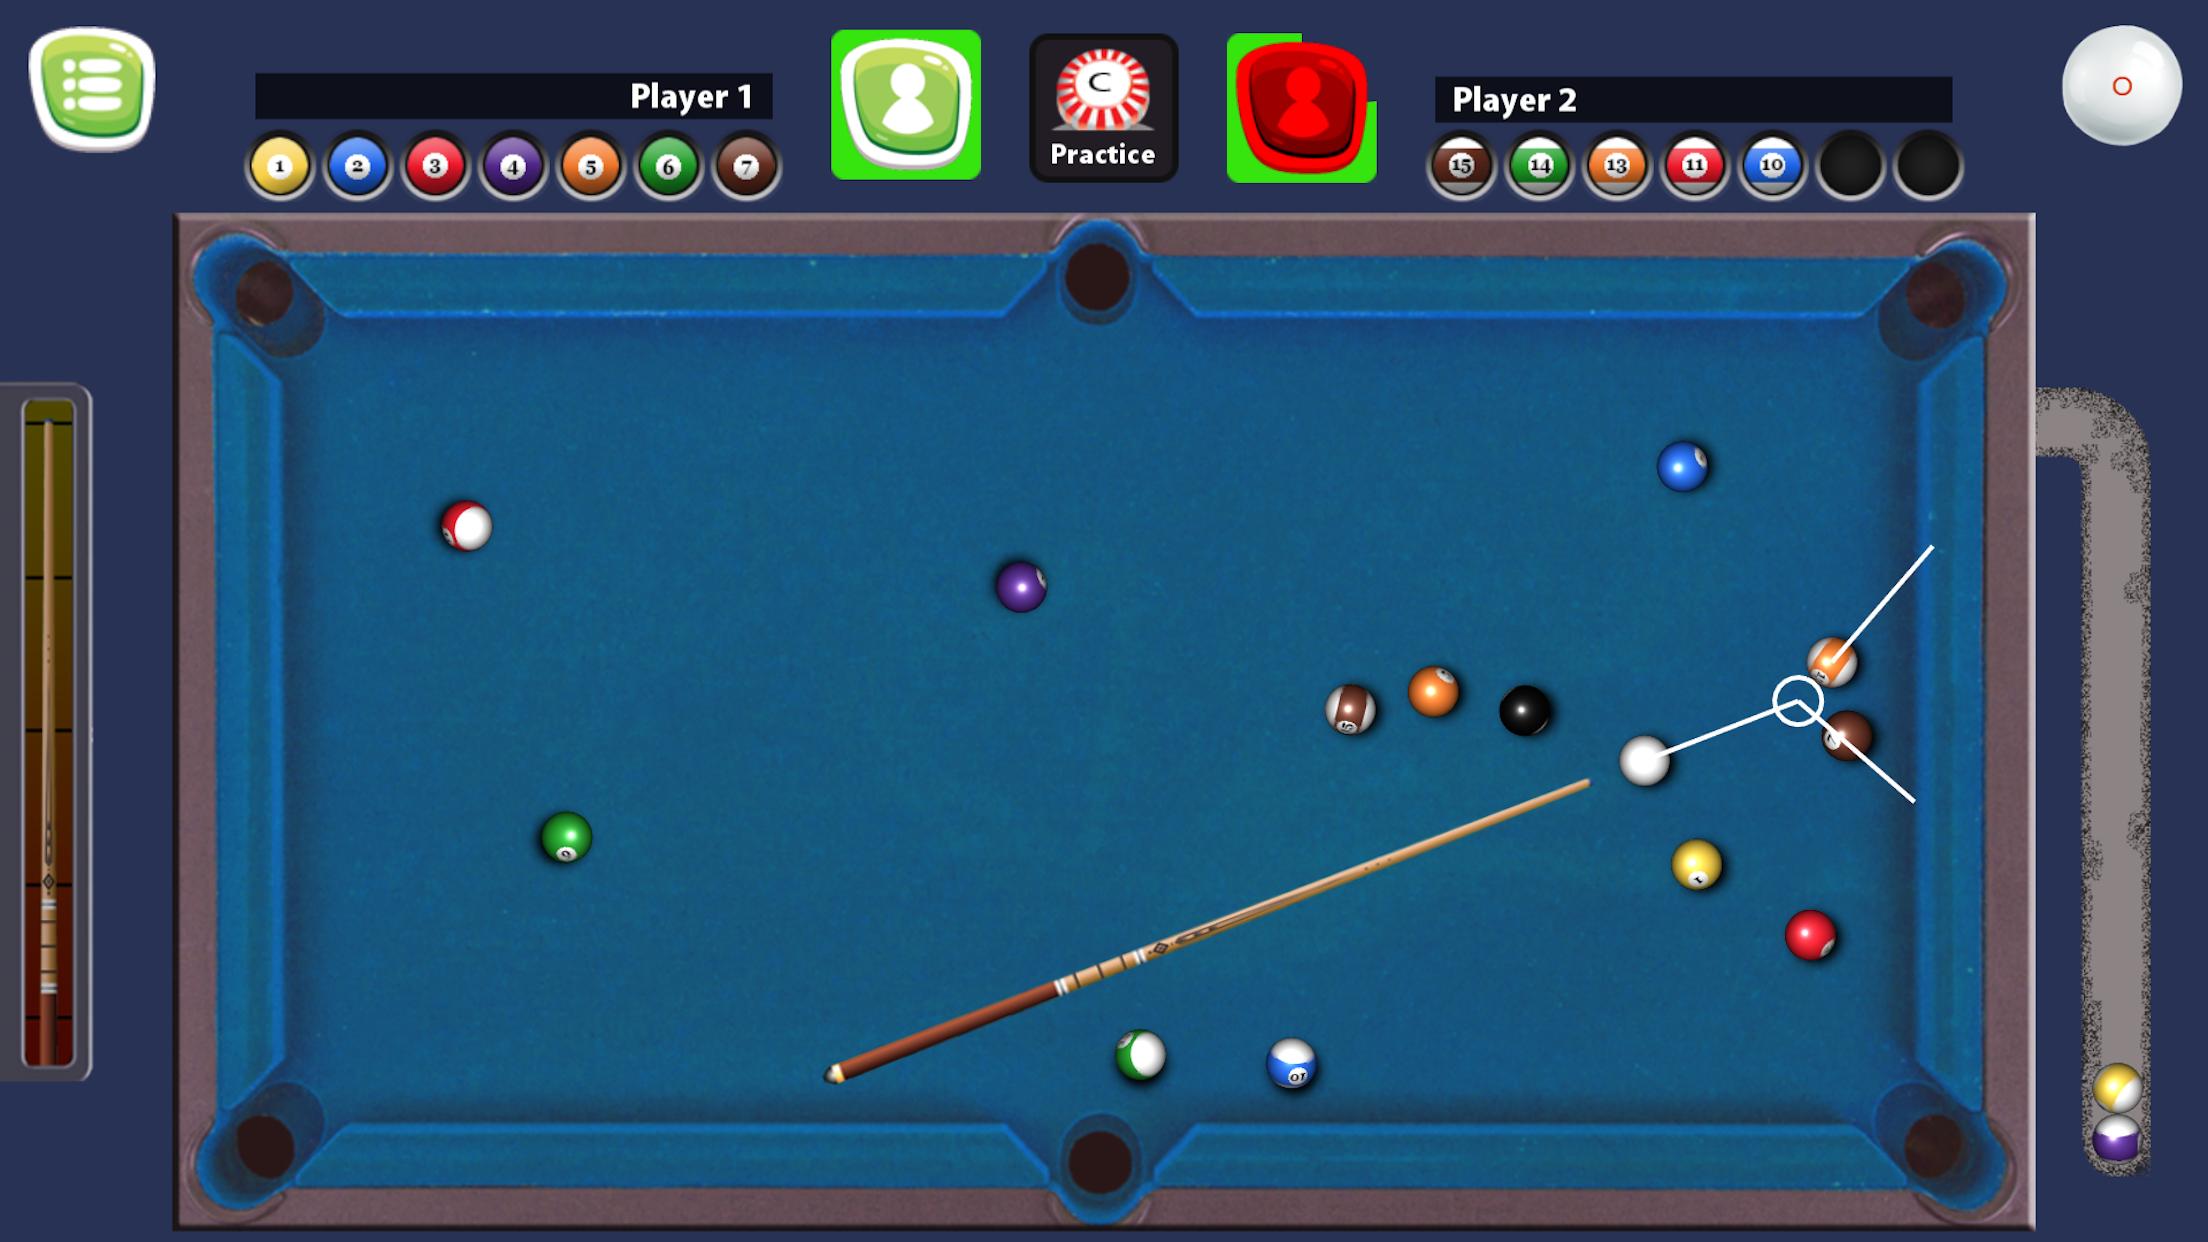 8 Ball Billiard Pro Multiplayer: PVP Snooker Game for Android - APK Download